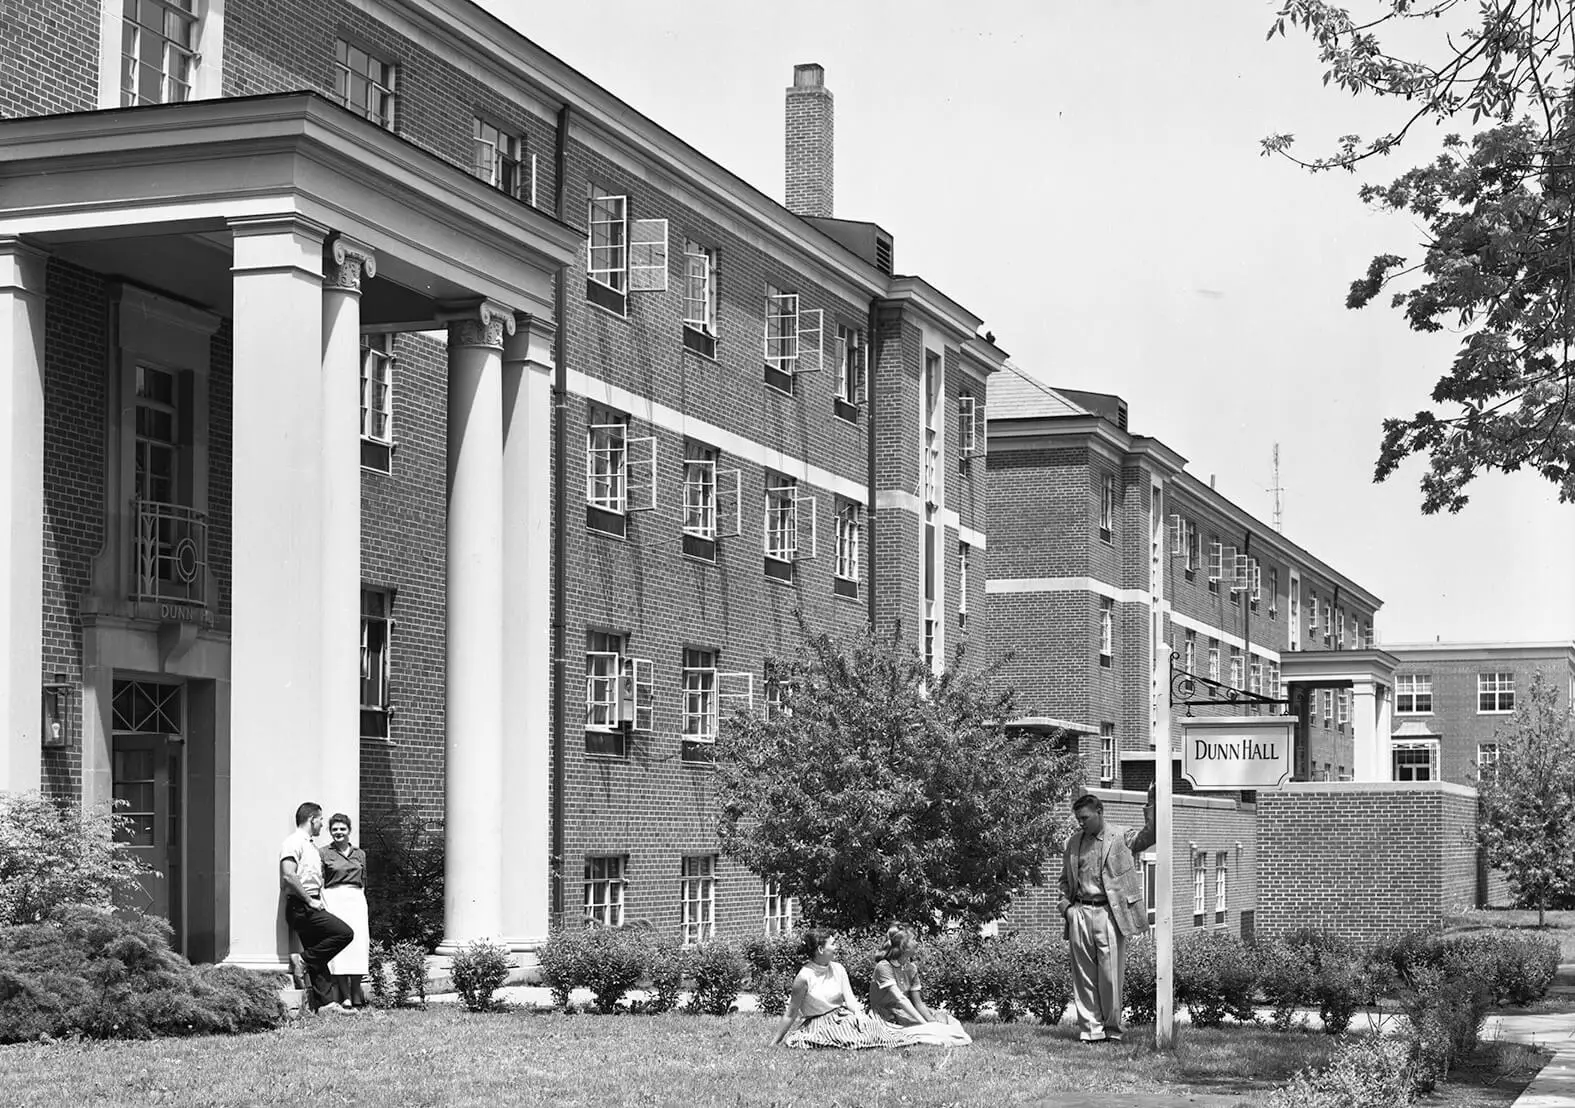 Two brick, four-story residential hall buildings with columns in front. A group of young men and women are outside.